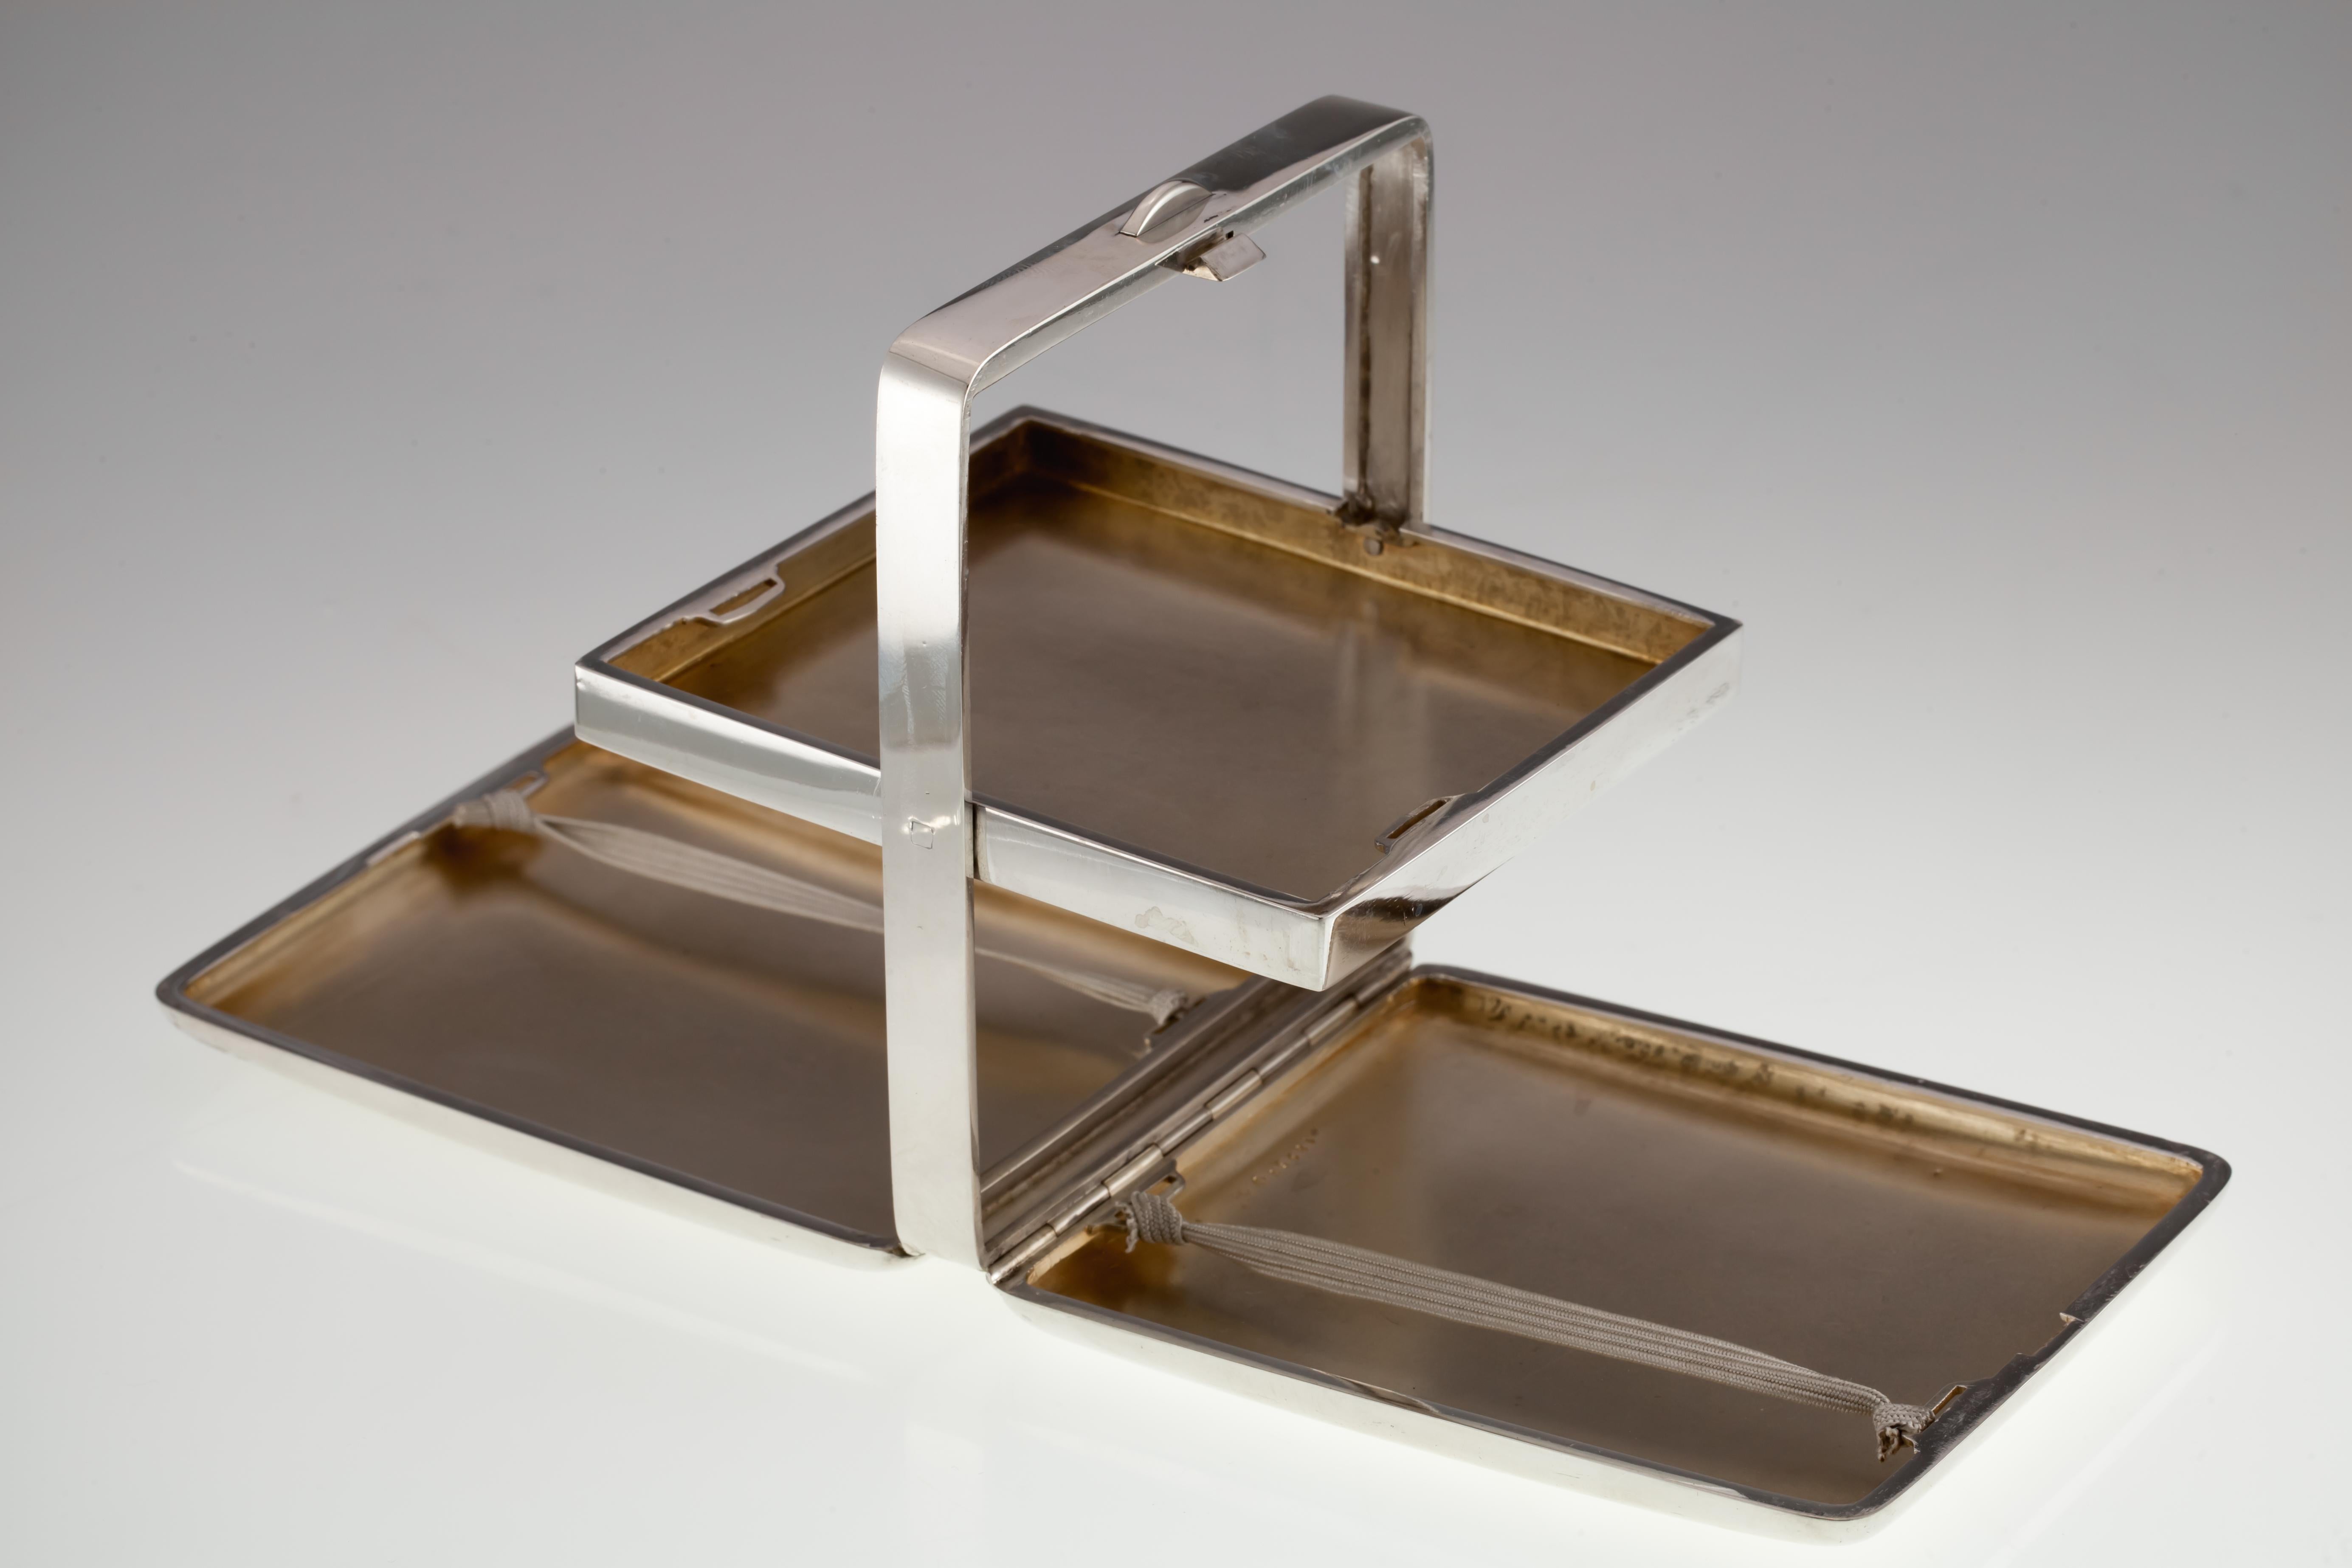 Howard & Co. Sterling Silver Heavy Displayable Cigarette Case w/ Tray
Gorgeous Displayable Cigarette Case with Included Tray
Case Opens Flat and Hinges Expose the Tray for Display
Dimensions of Case when closed = 108 x 88 x 28 mm
Dimensions when